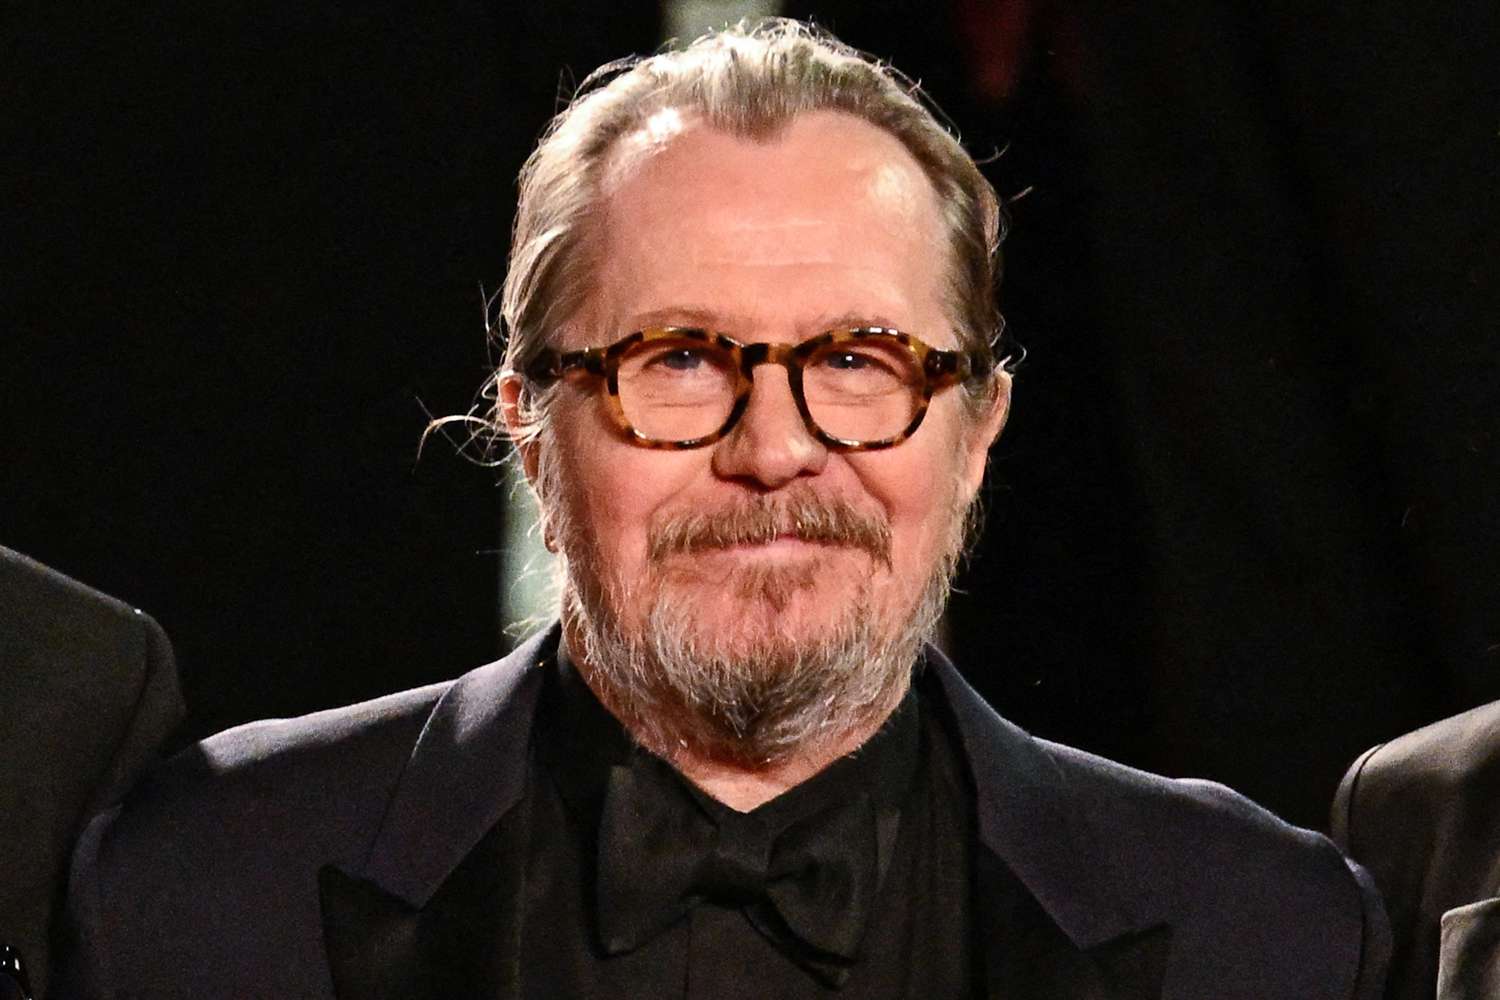 Gary Oldman Clarifies Why He Called His 'Harry Potter' Acting 'Mediocre': 'I Might Have Approached It Differently'